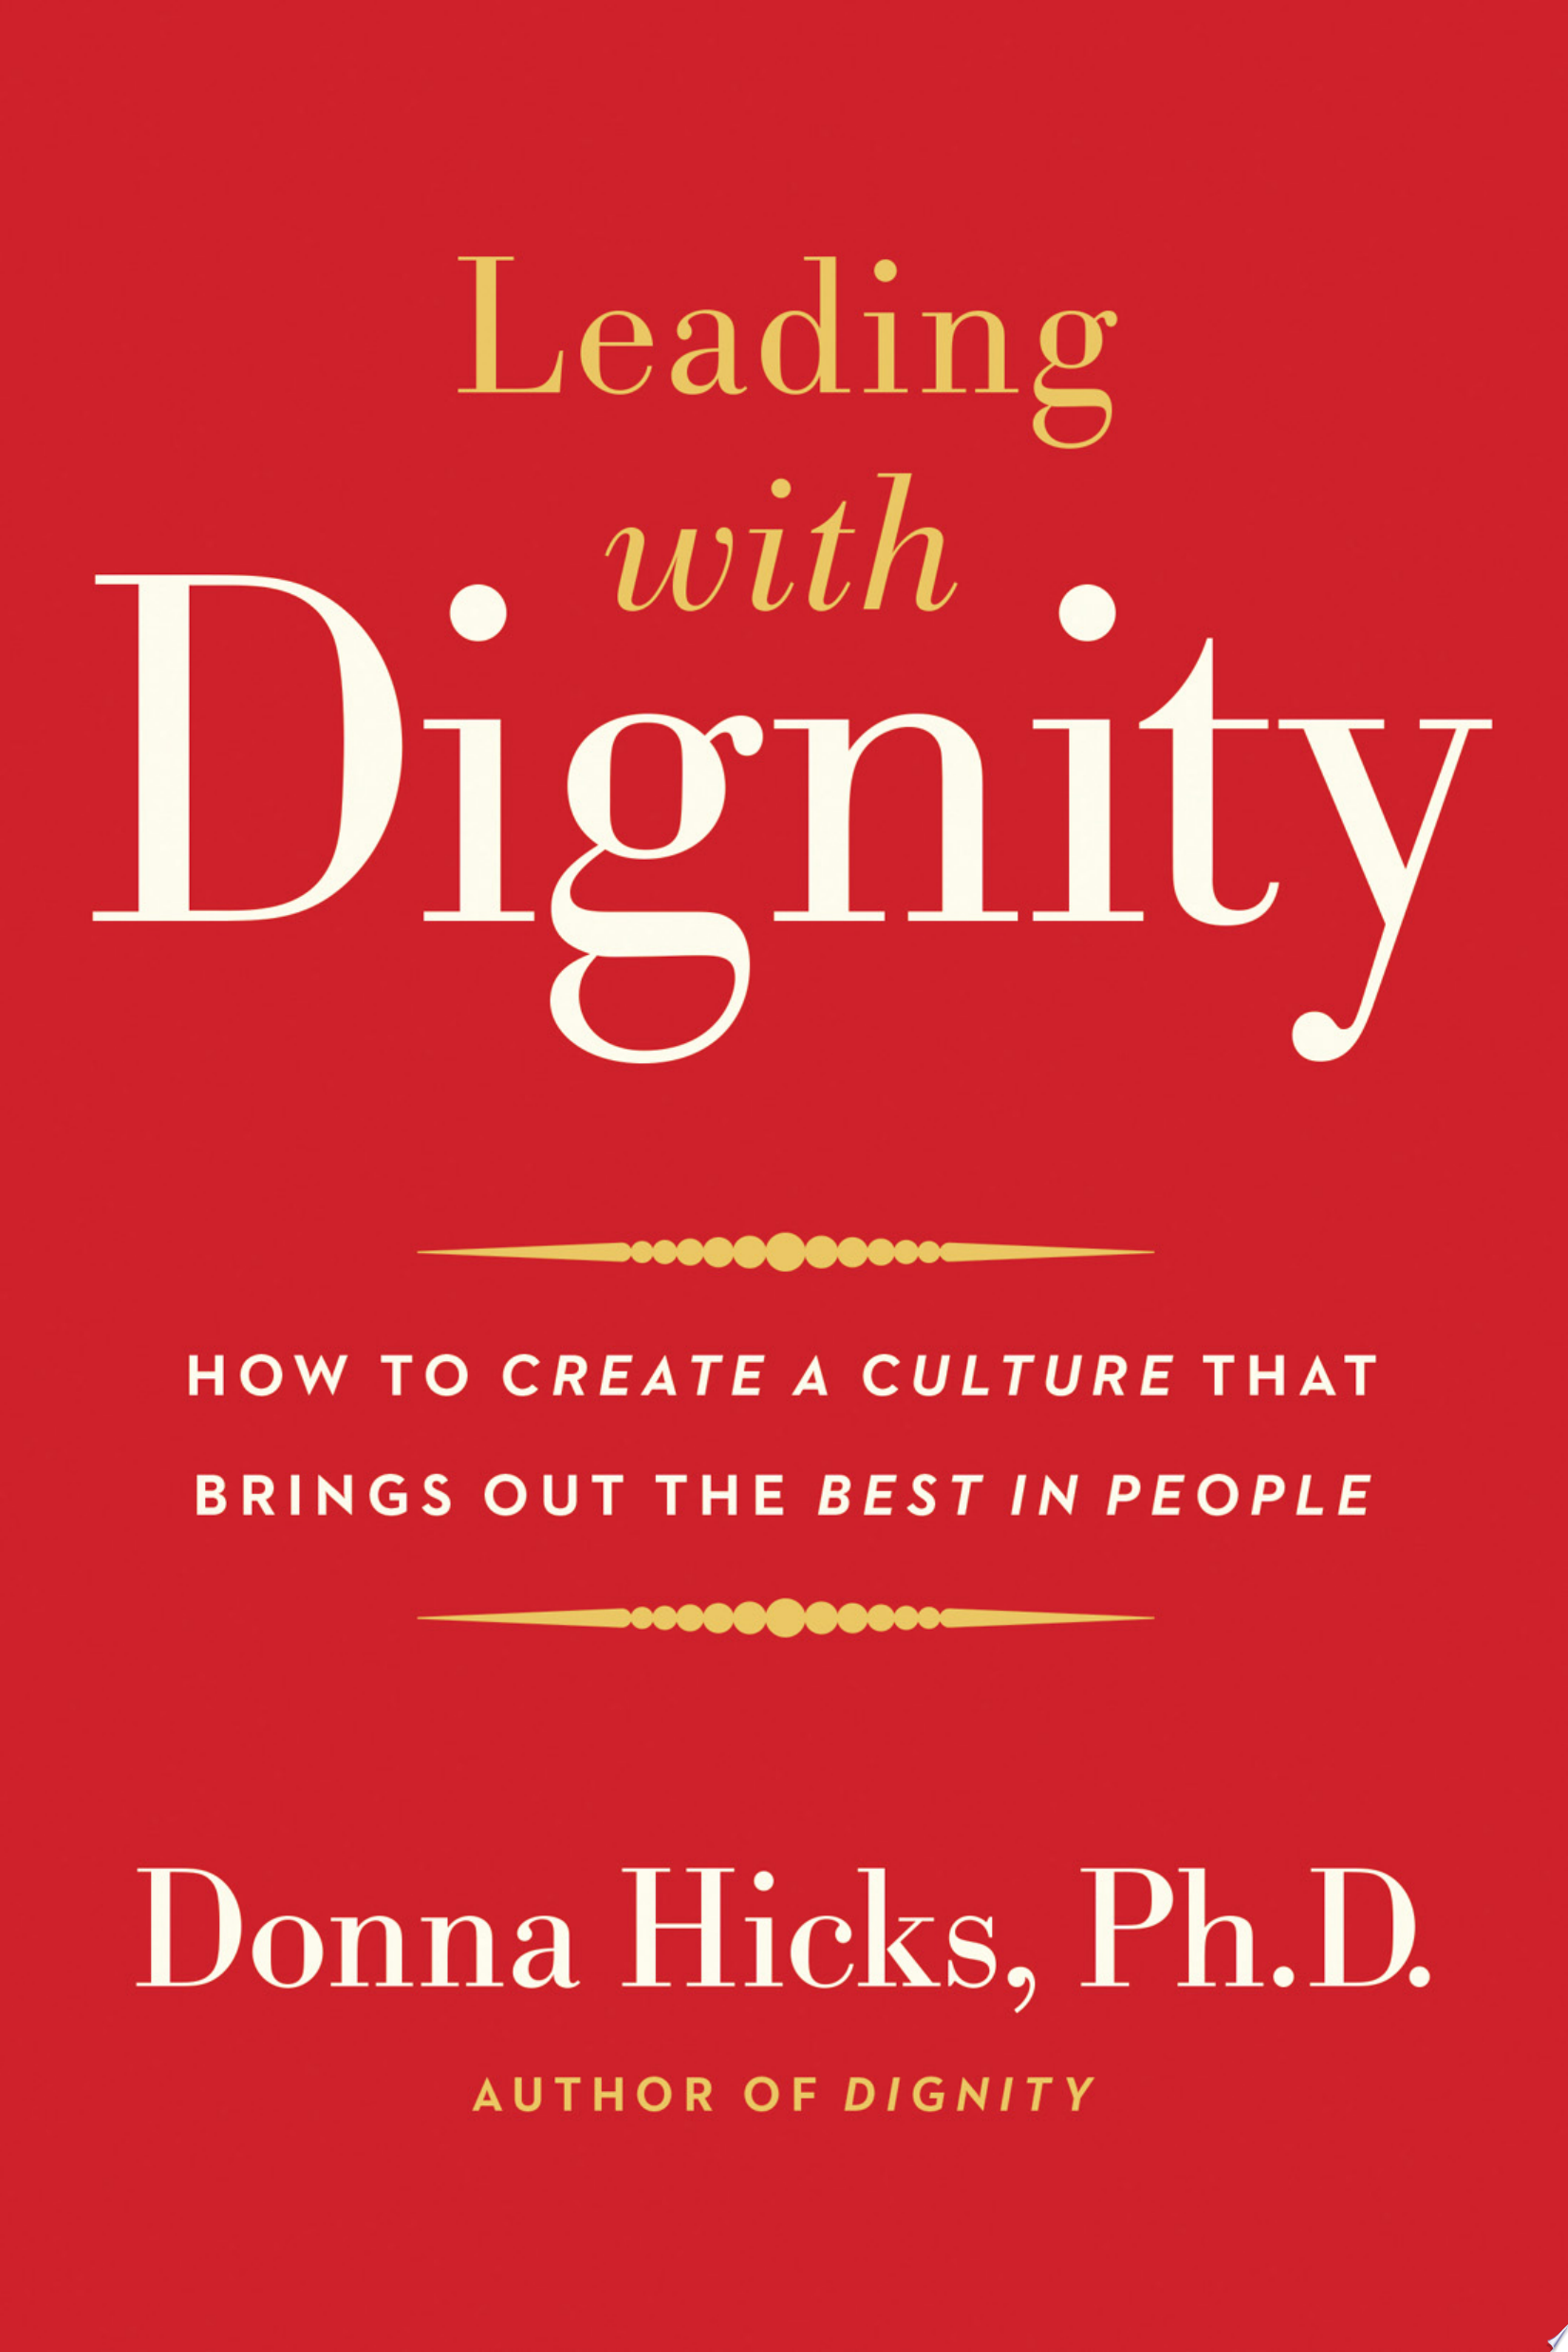 Image for "Leading with Dignity"